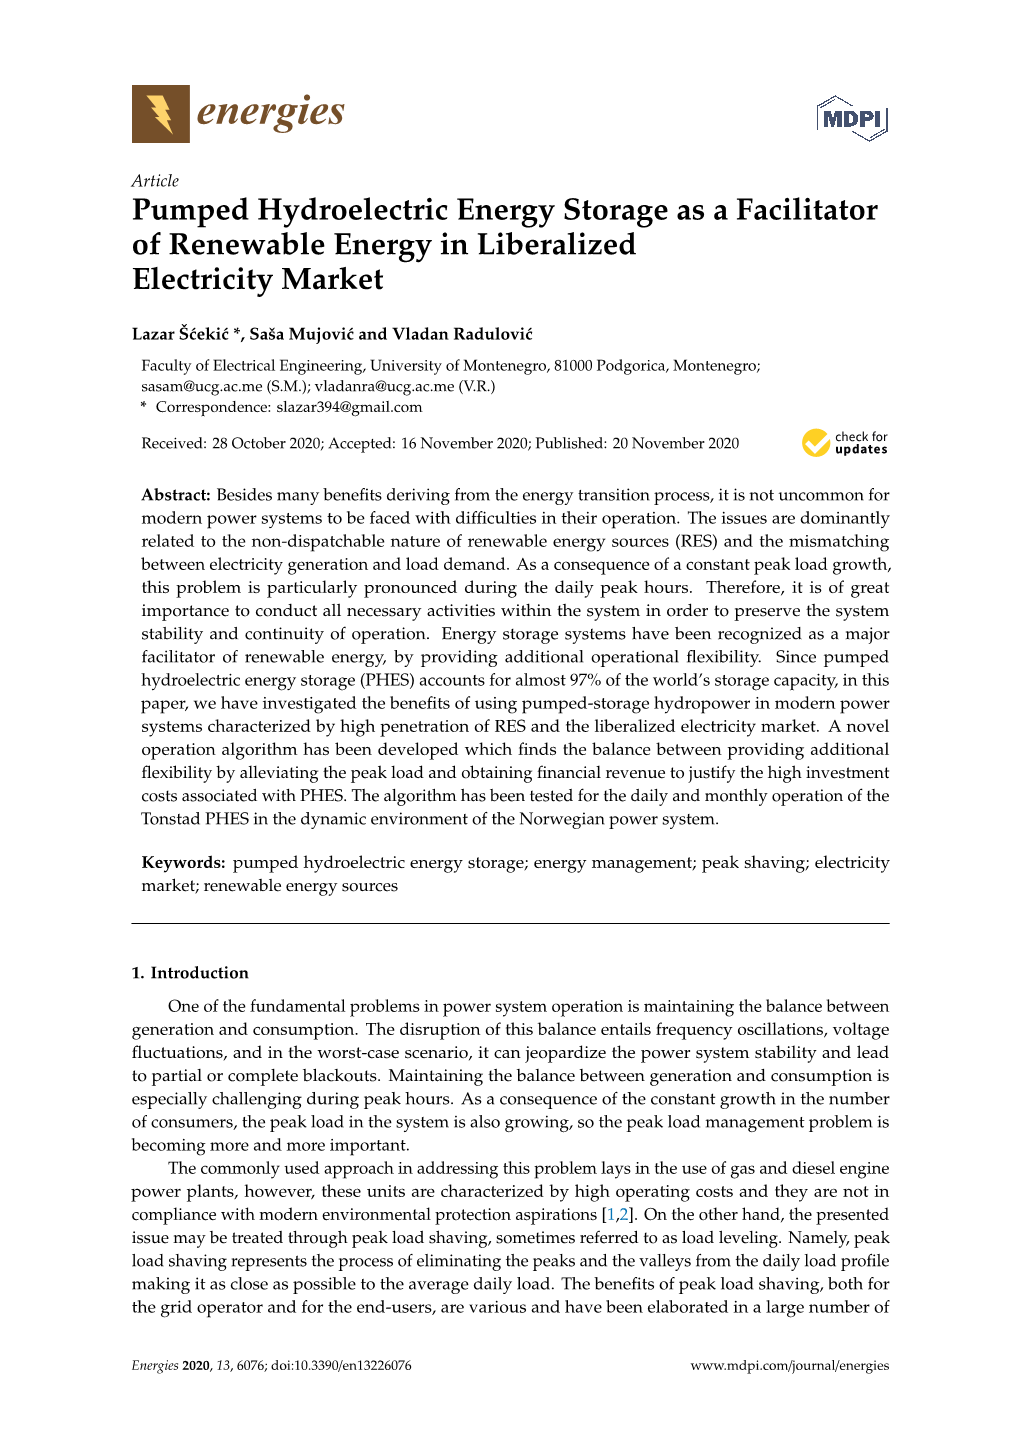 Pumped Hydroelectric Energy Storage As a Facilitator of Renewable Energy in Liberalized Electricity Market